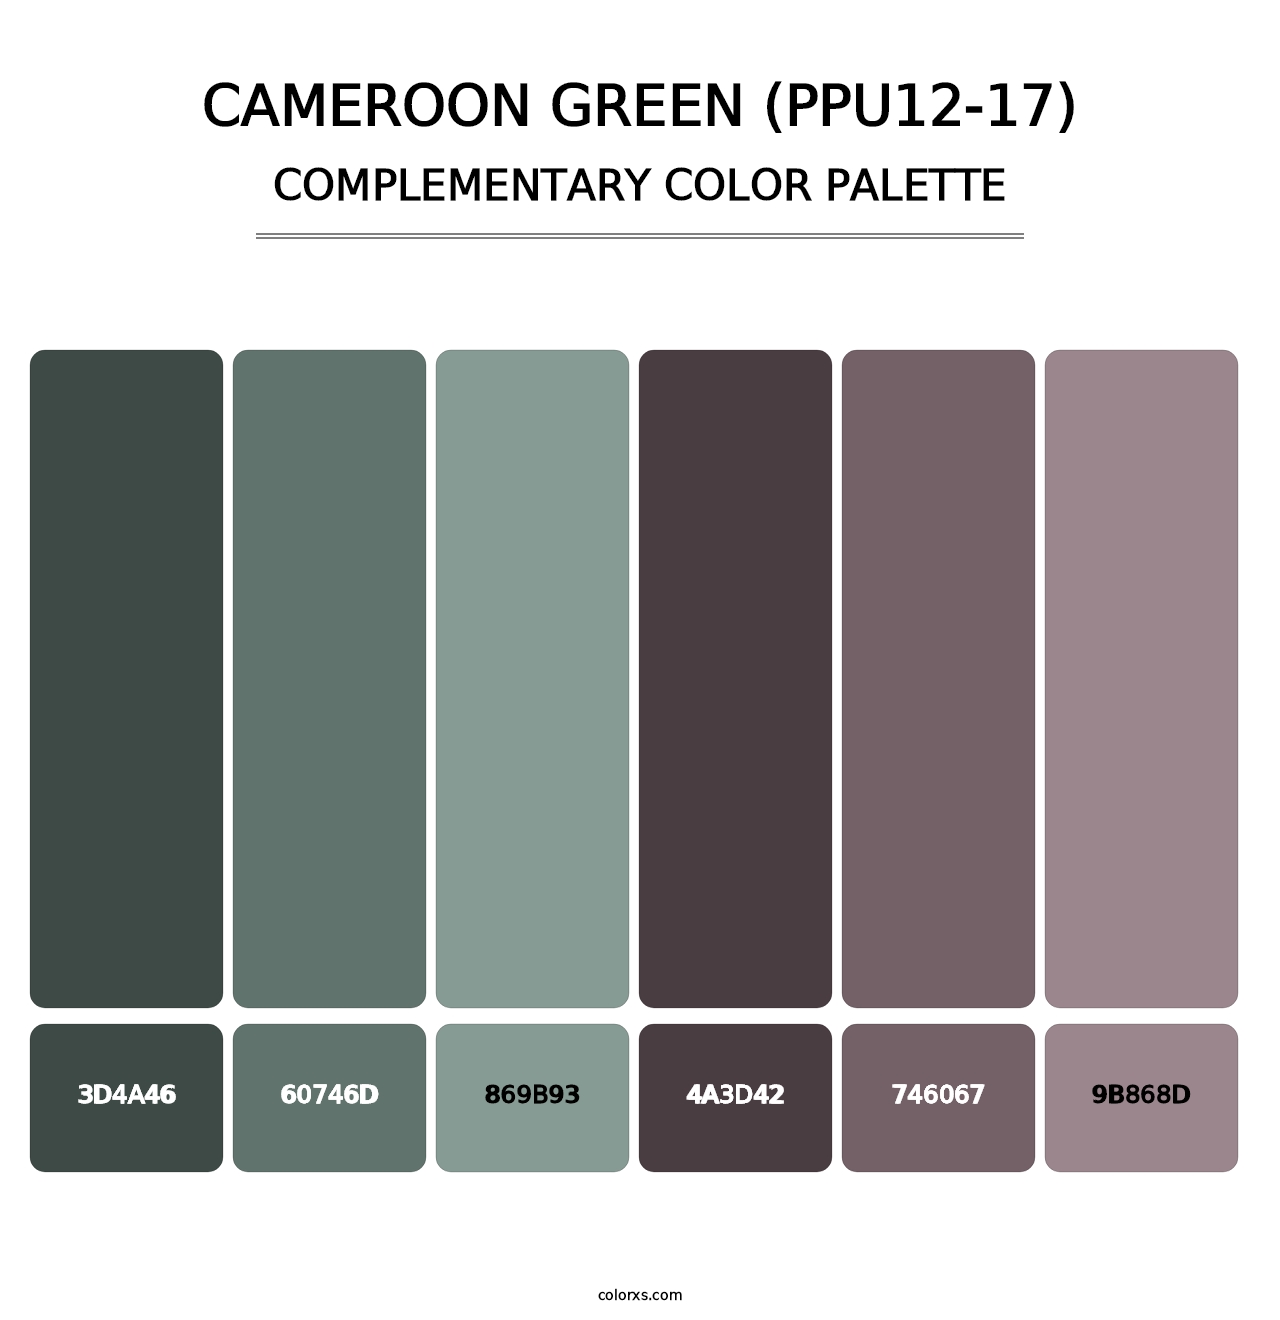 Cameroon Green (PPU12-17) - Complementary Color Palette